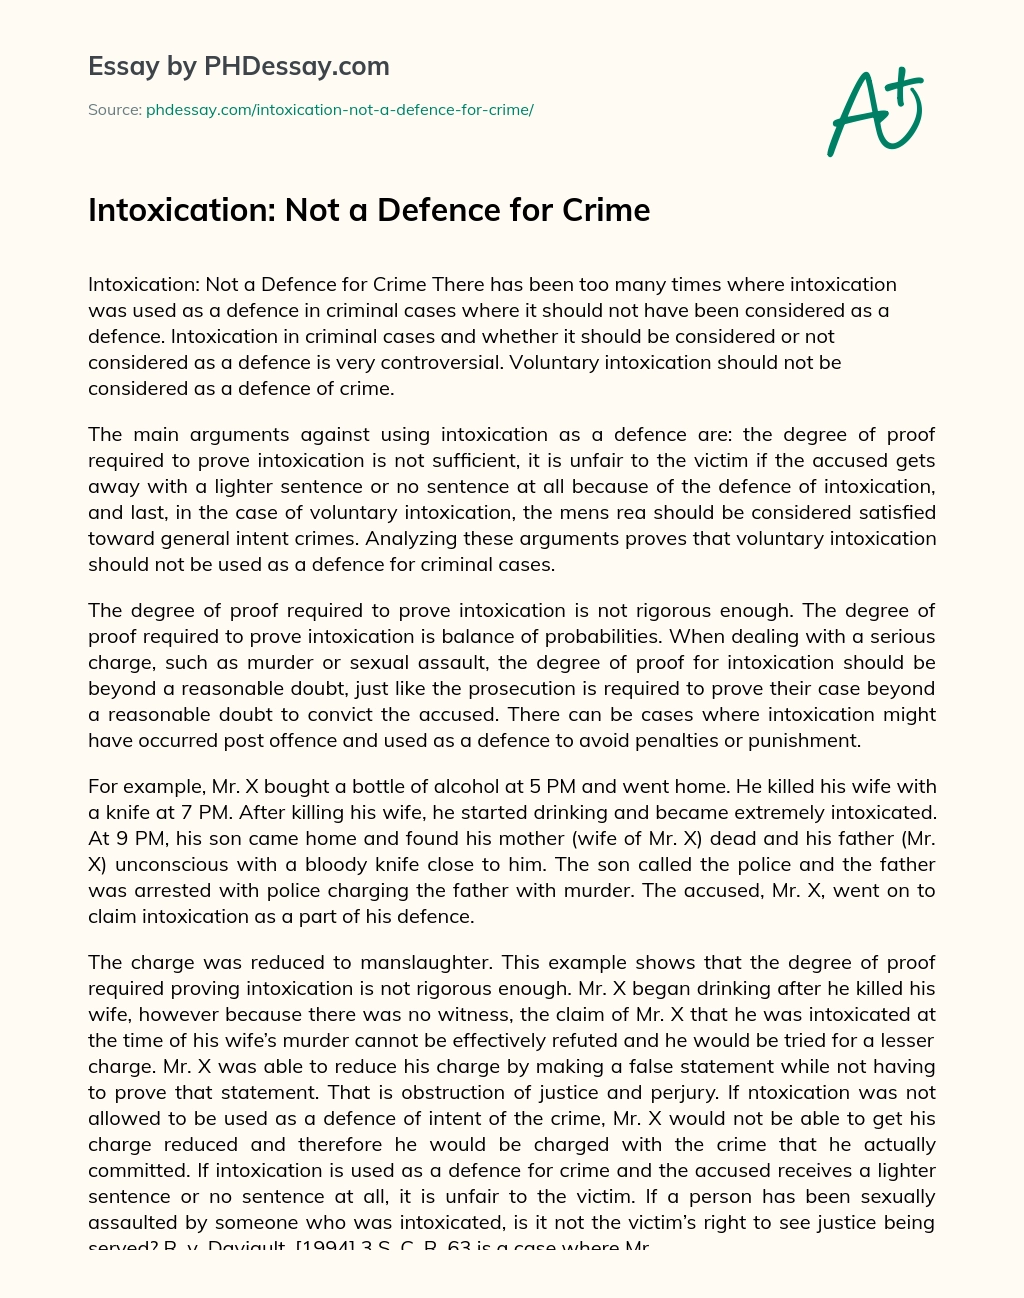 Intoxication: Not a Defence for Crime essay